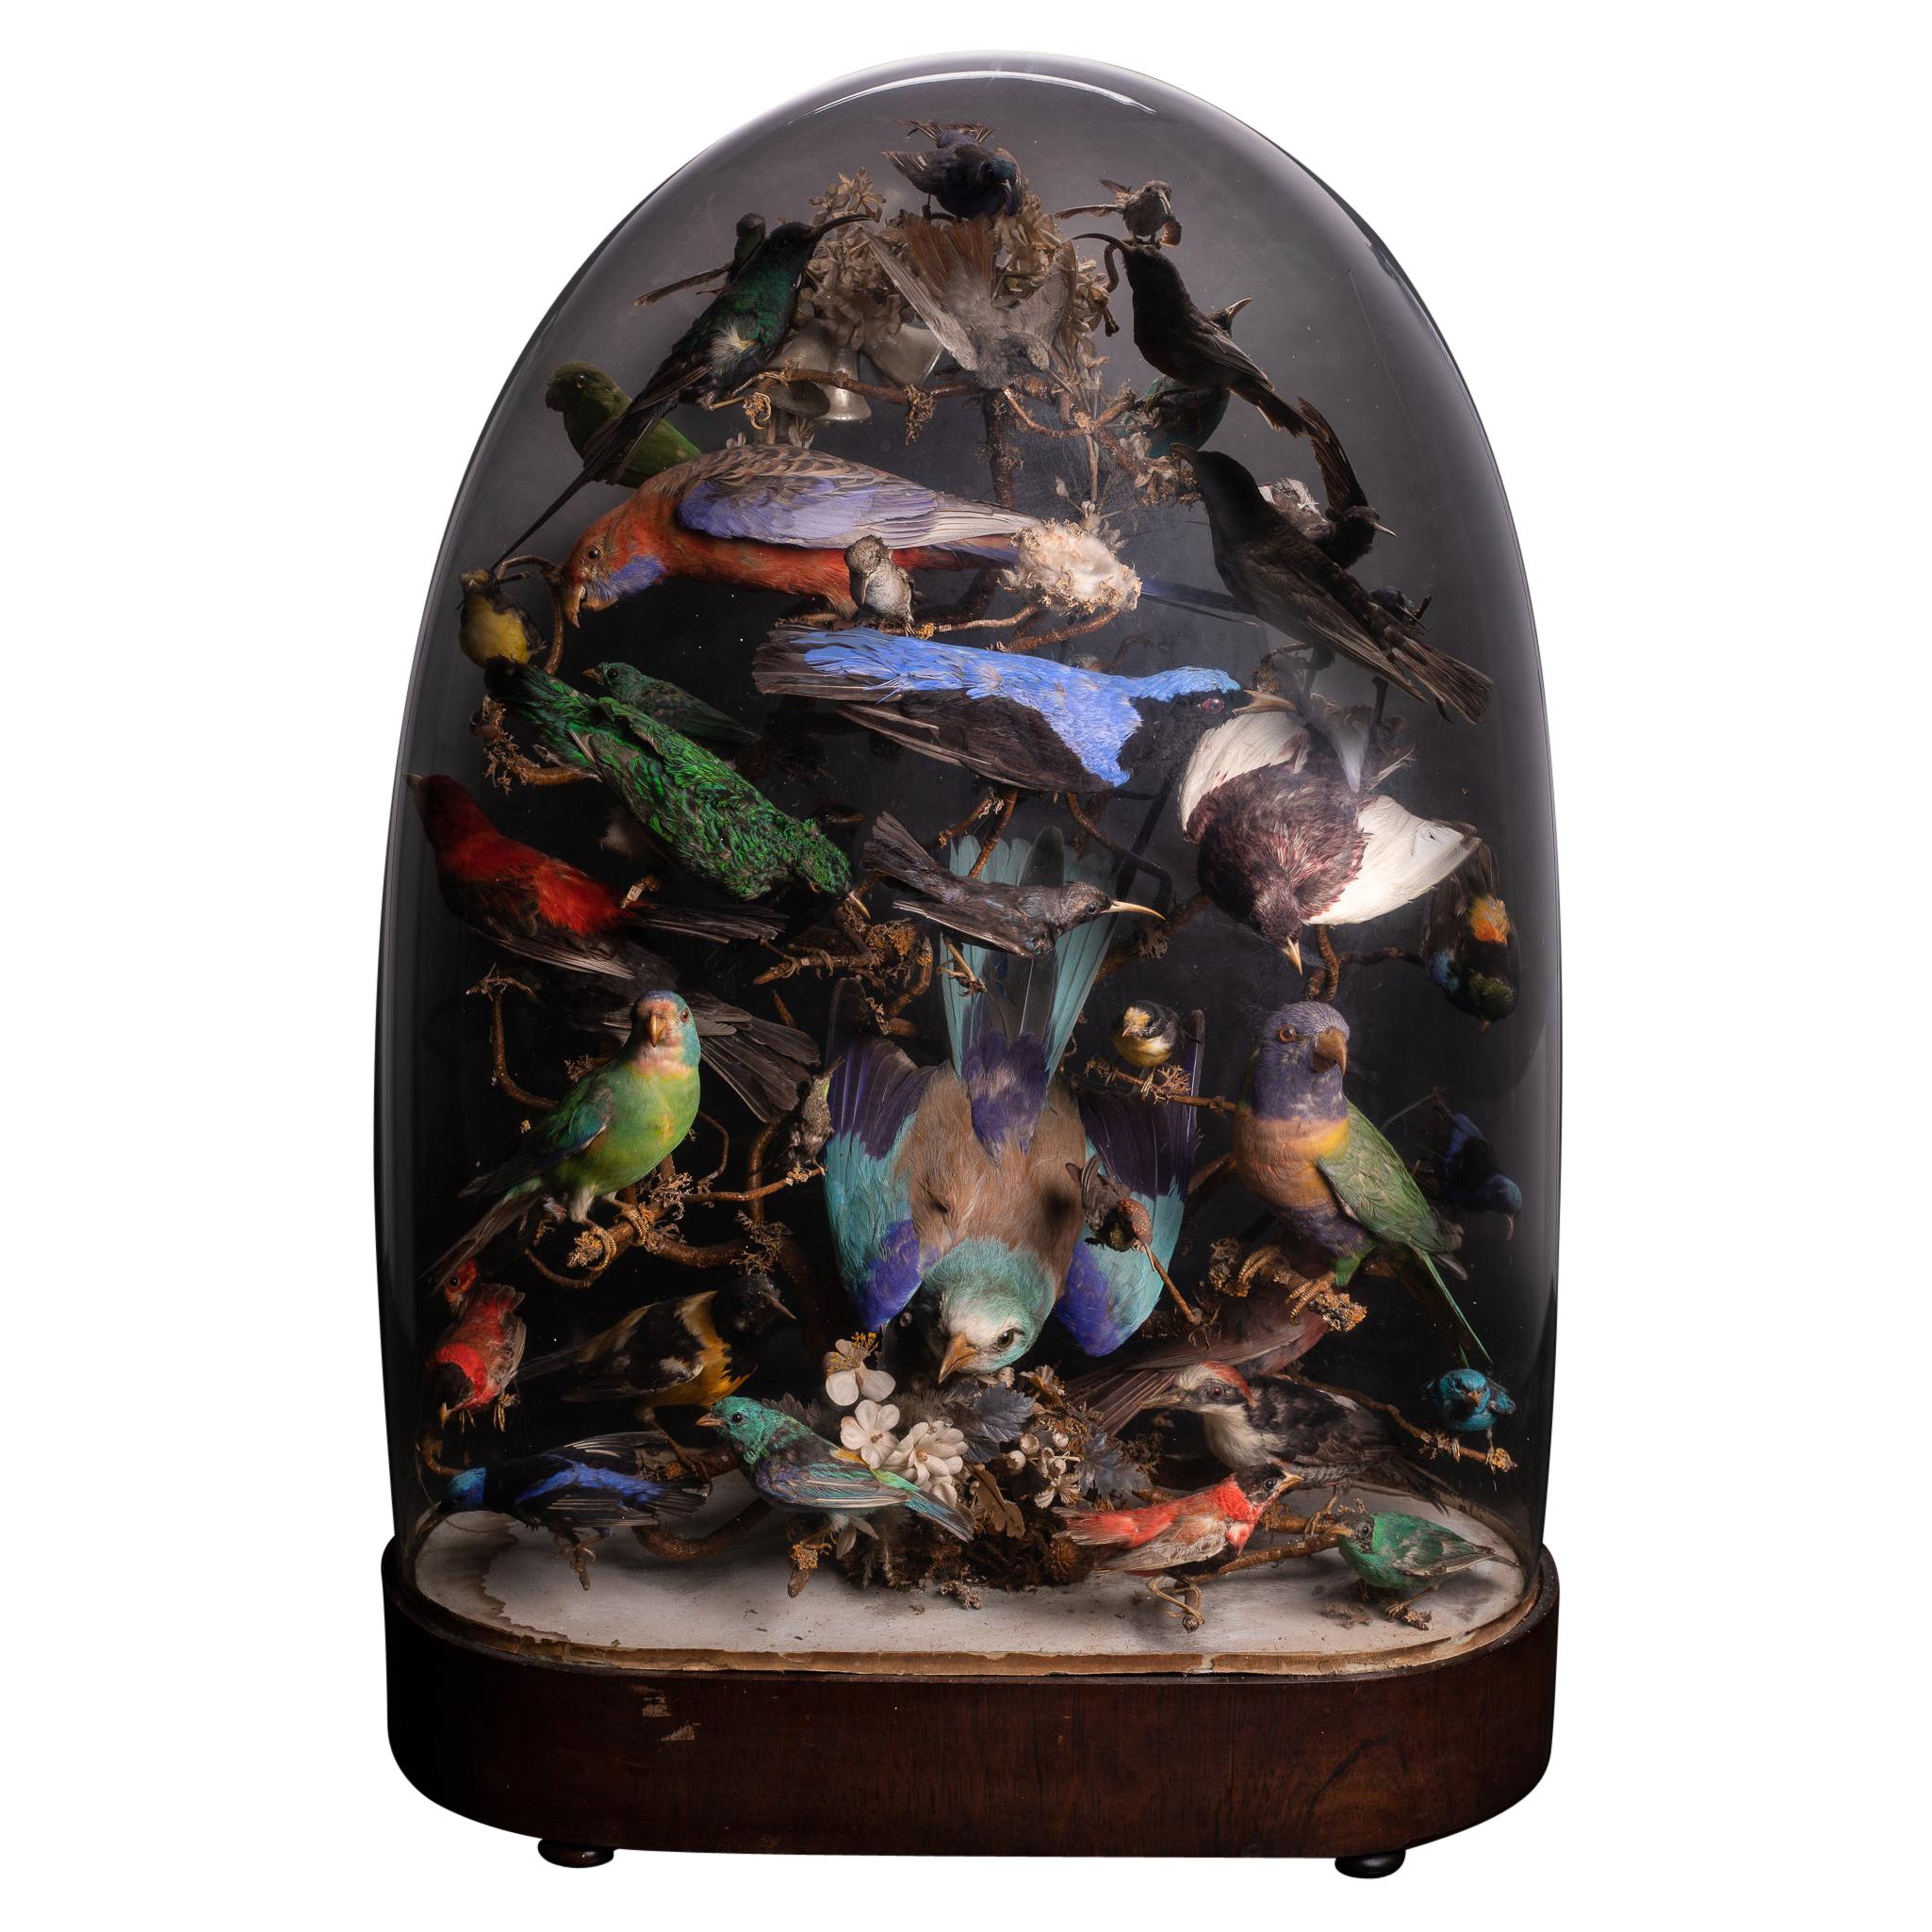 United Kingdom, 1880, Victorian Glass Dome with 36 Exotic Birds